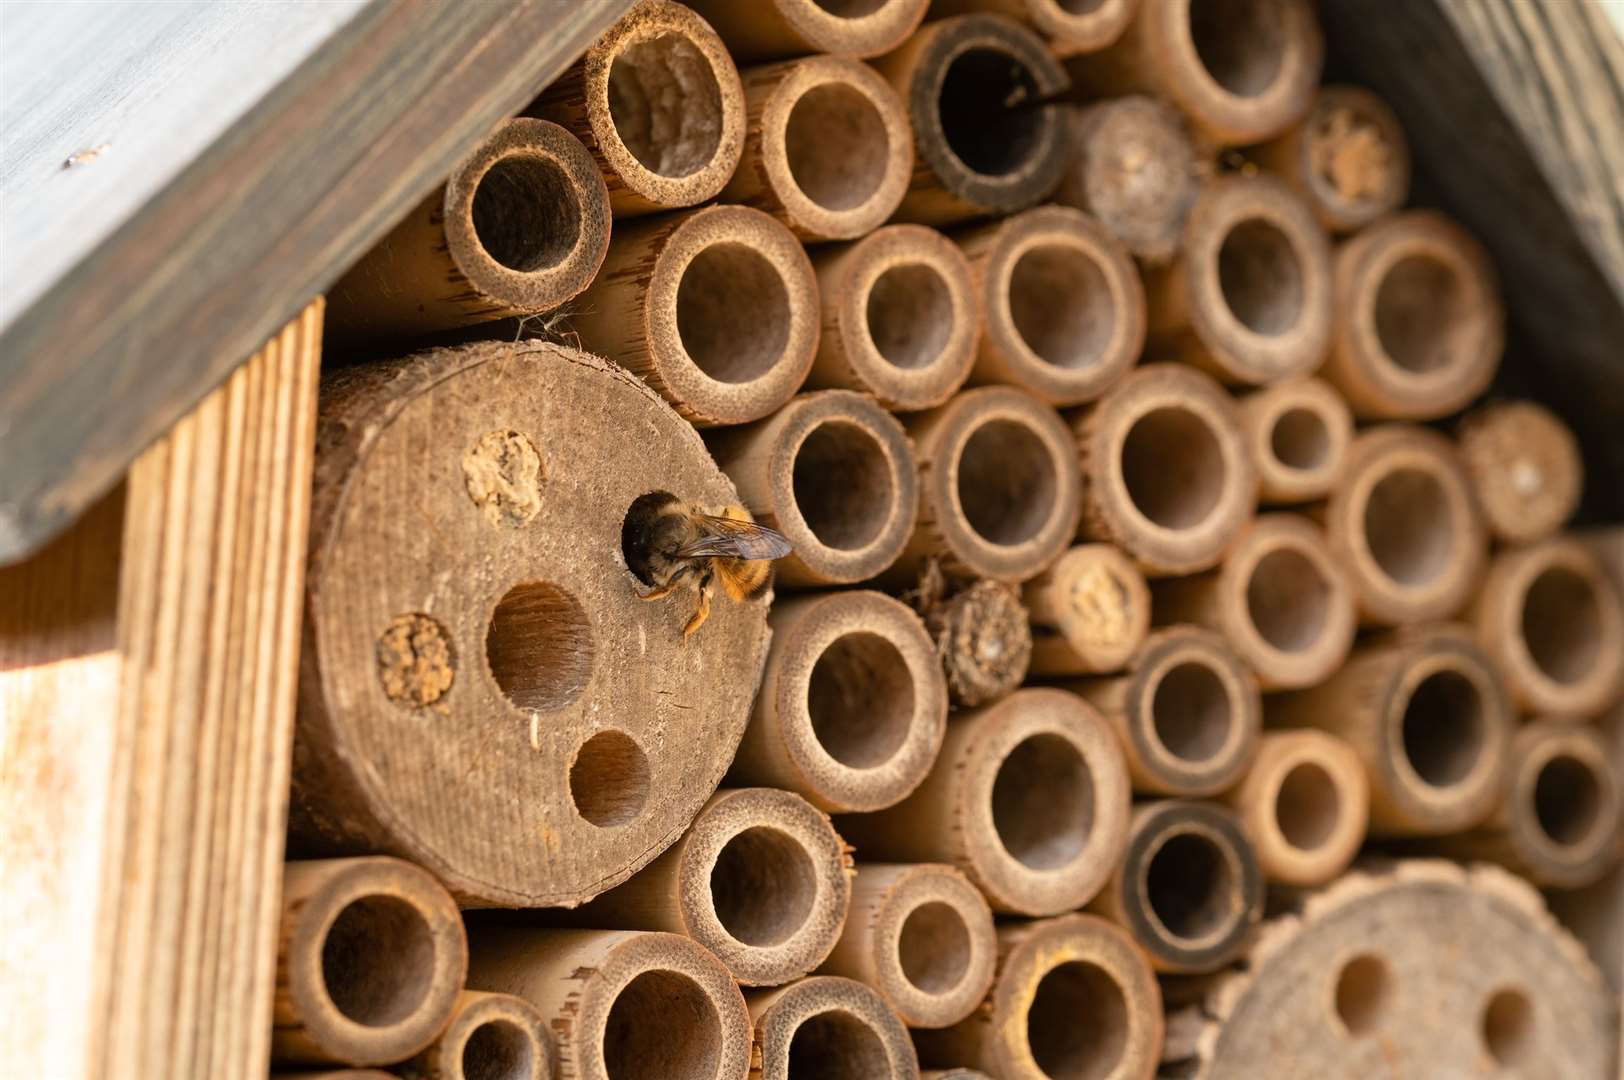 Bee hotels can provide valuable habitat for pollinators.